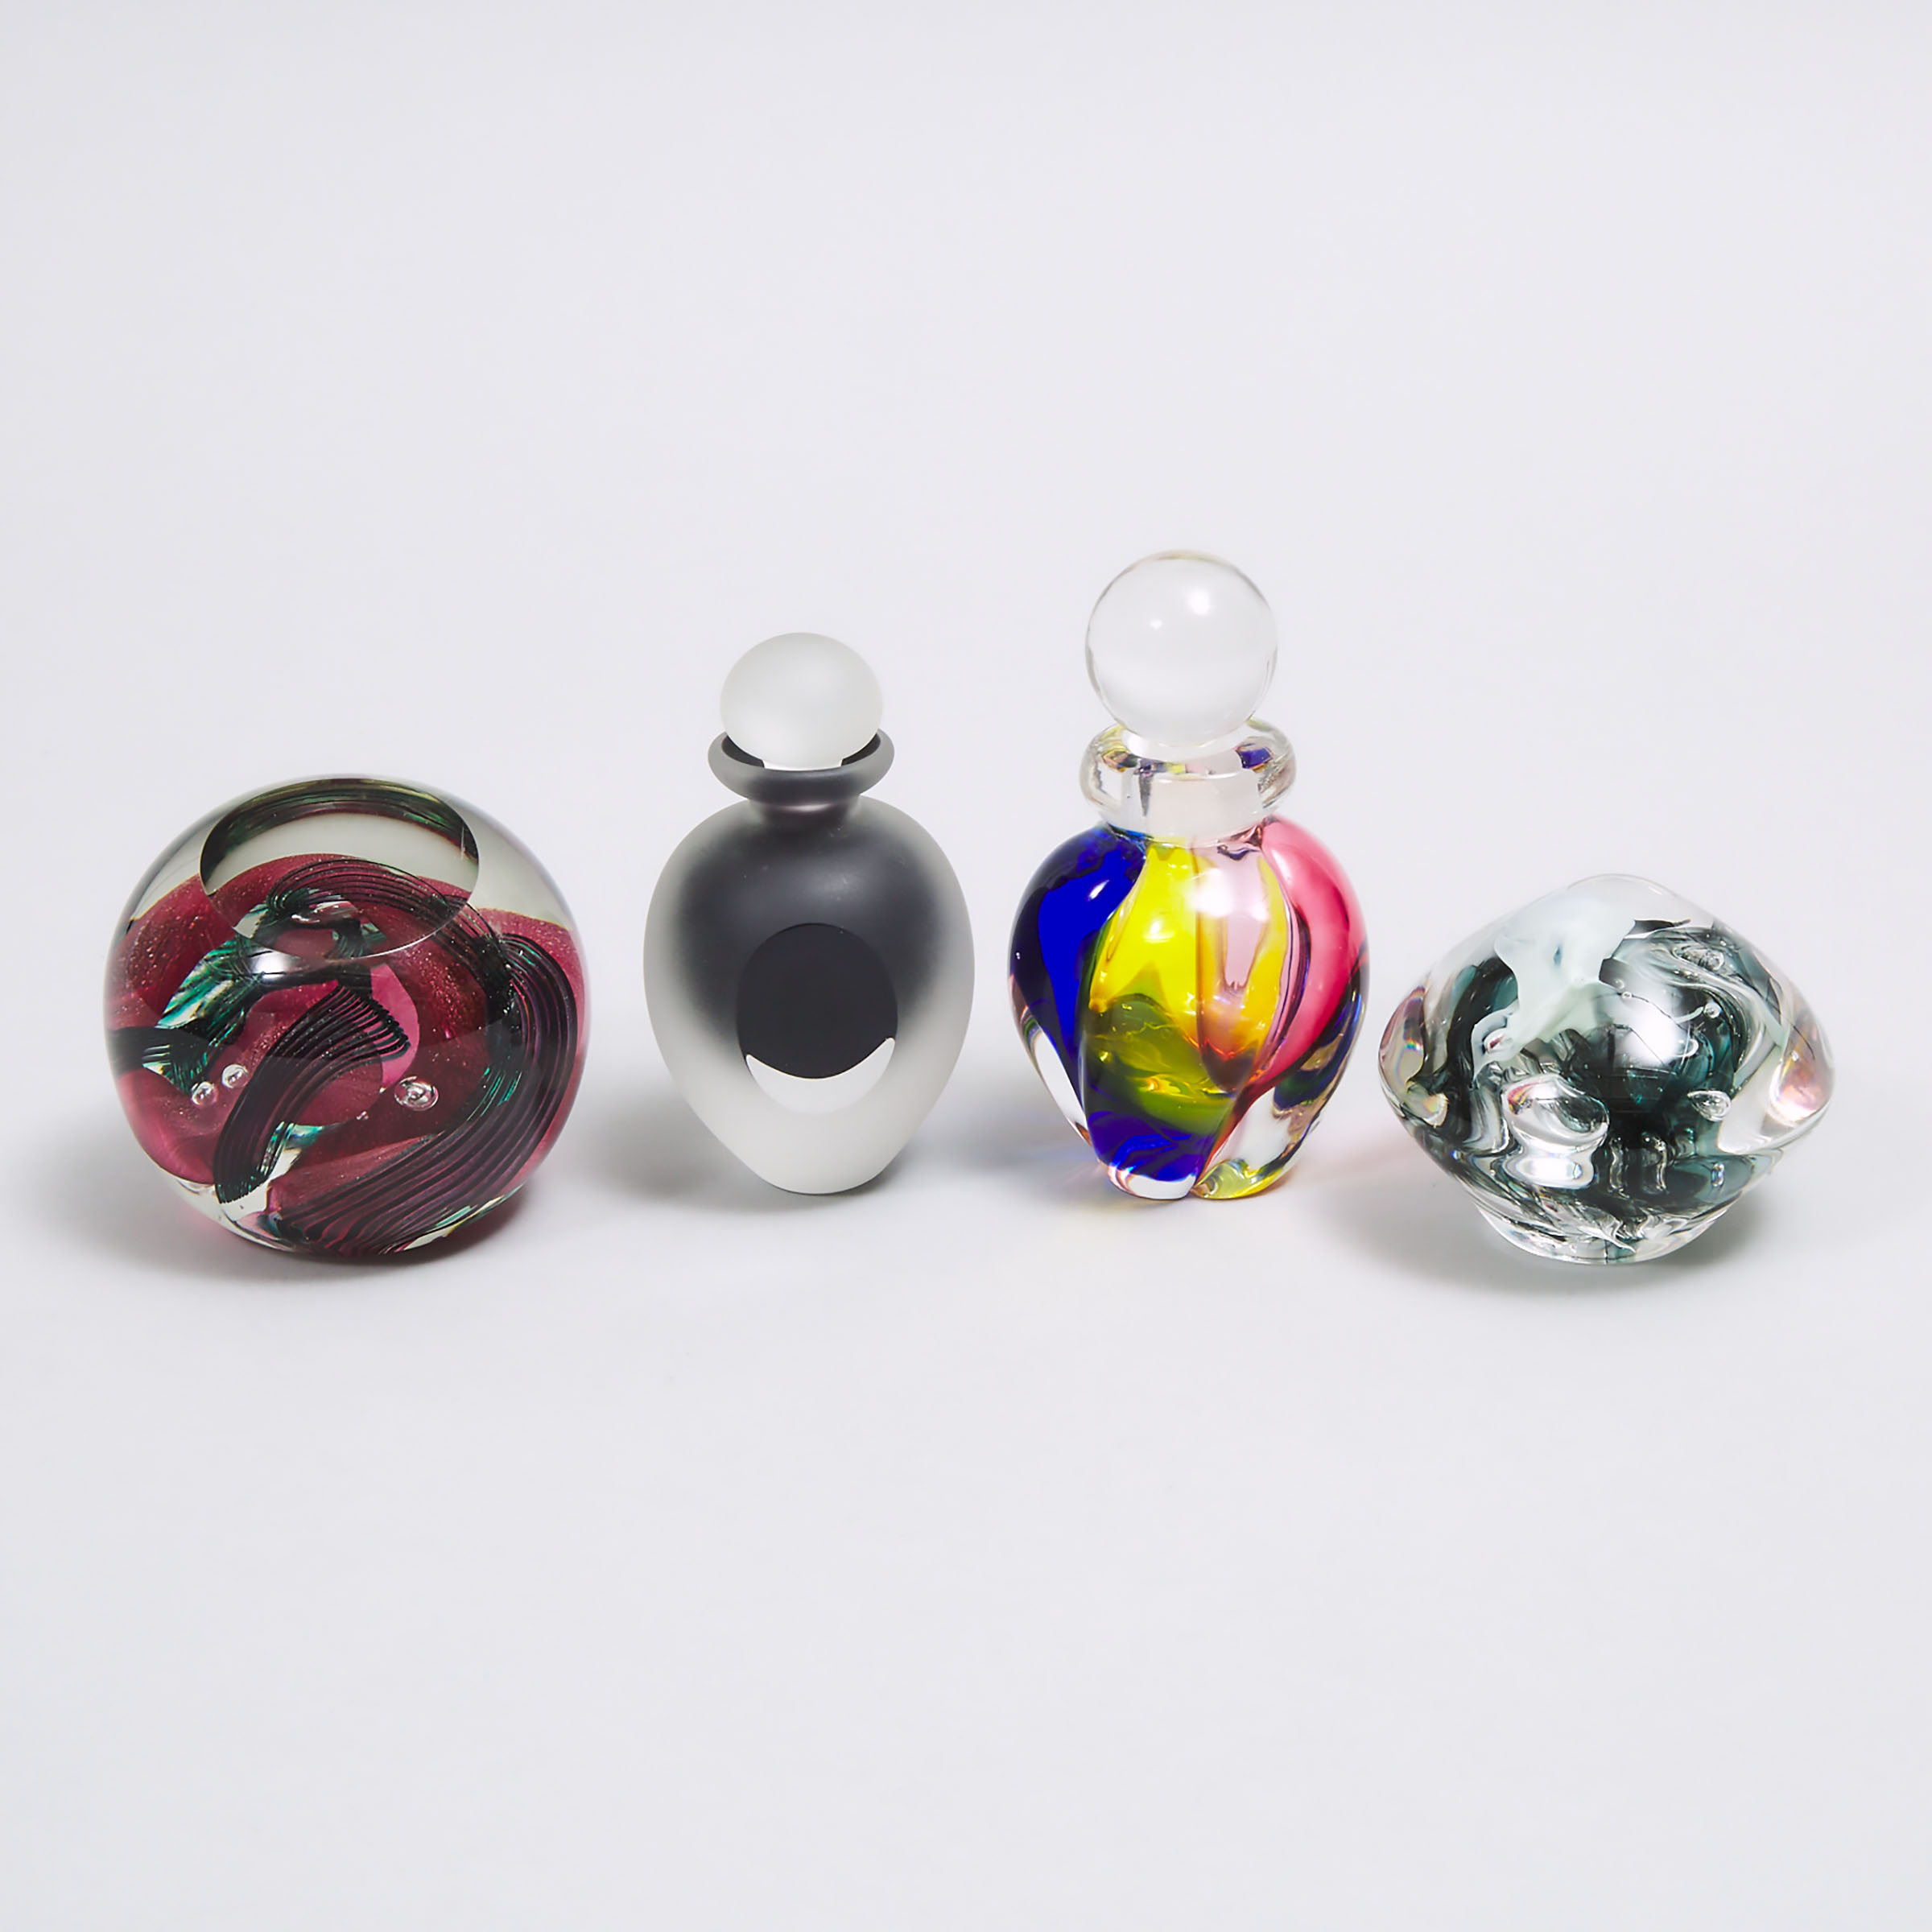 Two Studio Glass Paperweights and Two Perfume Bottles, late 20th century